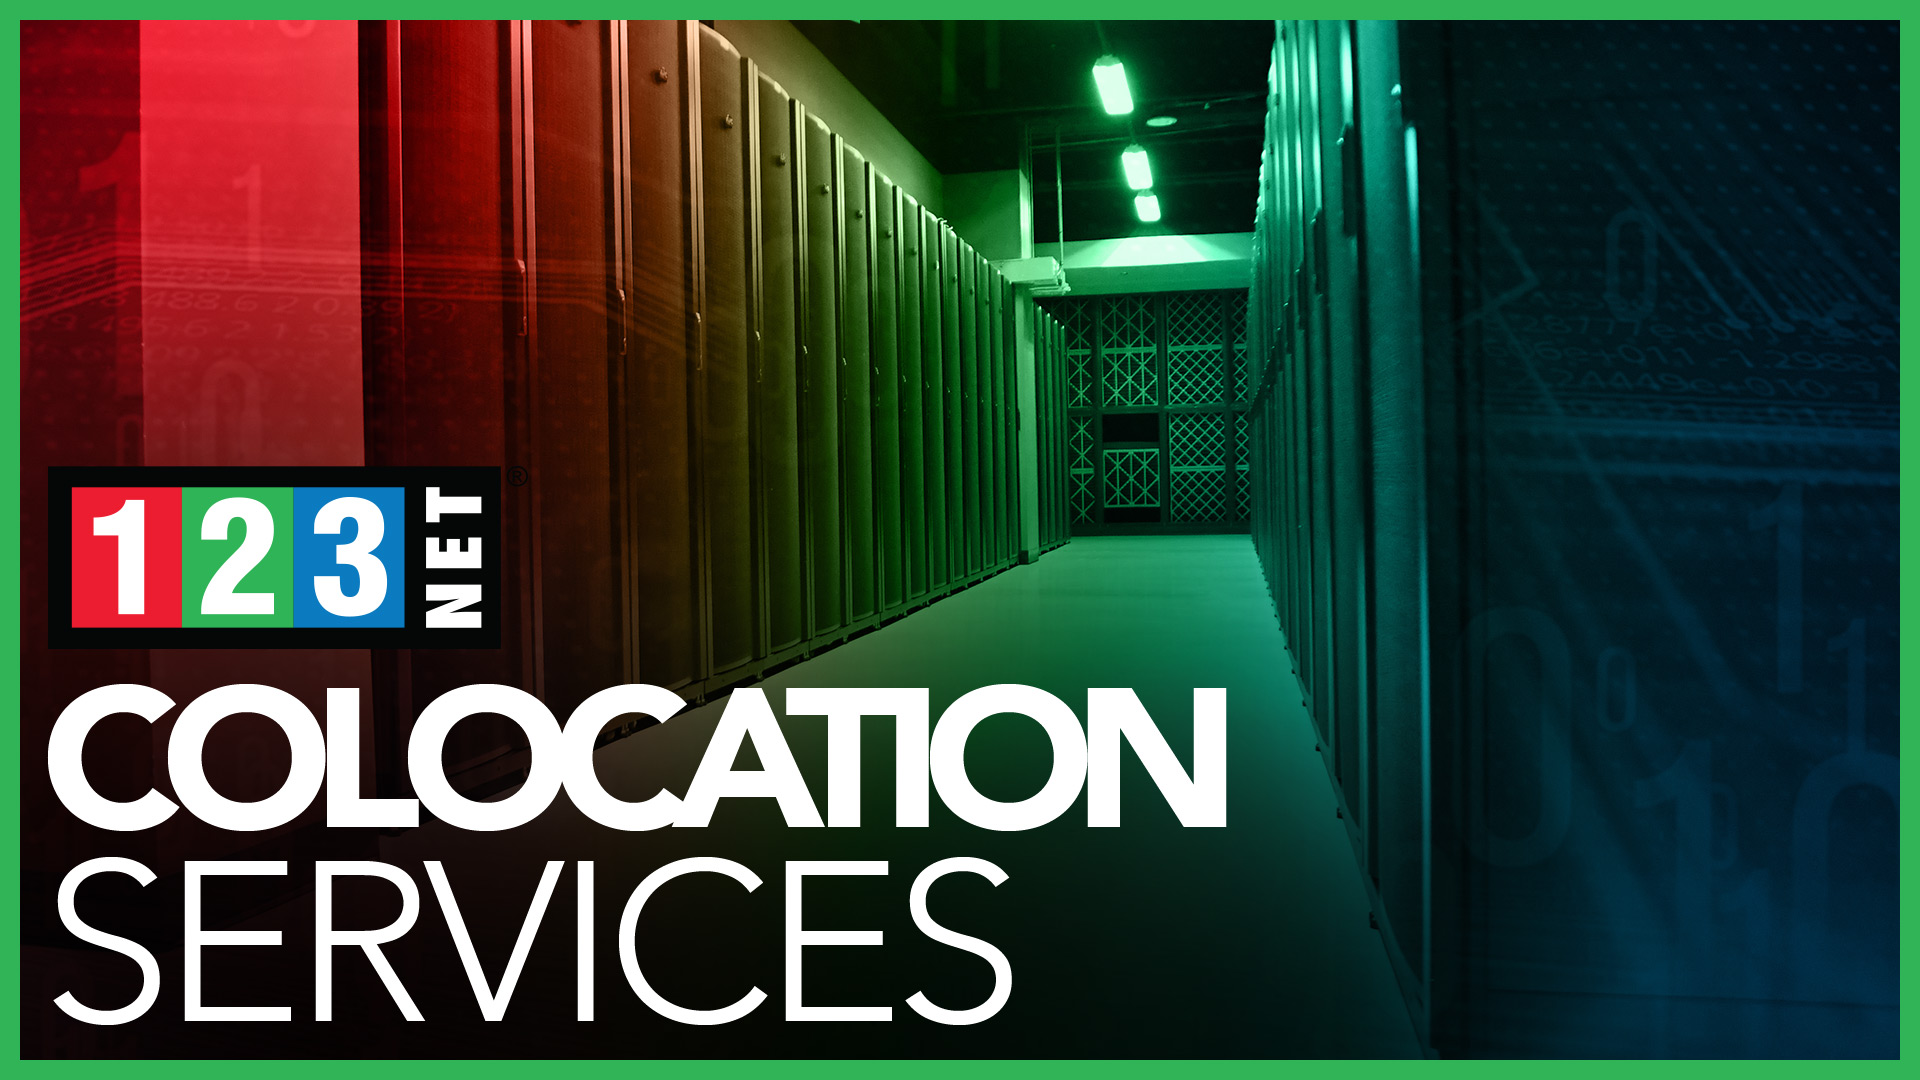 A blog discussing colocation services